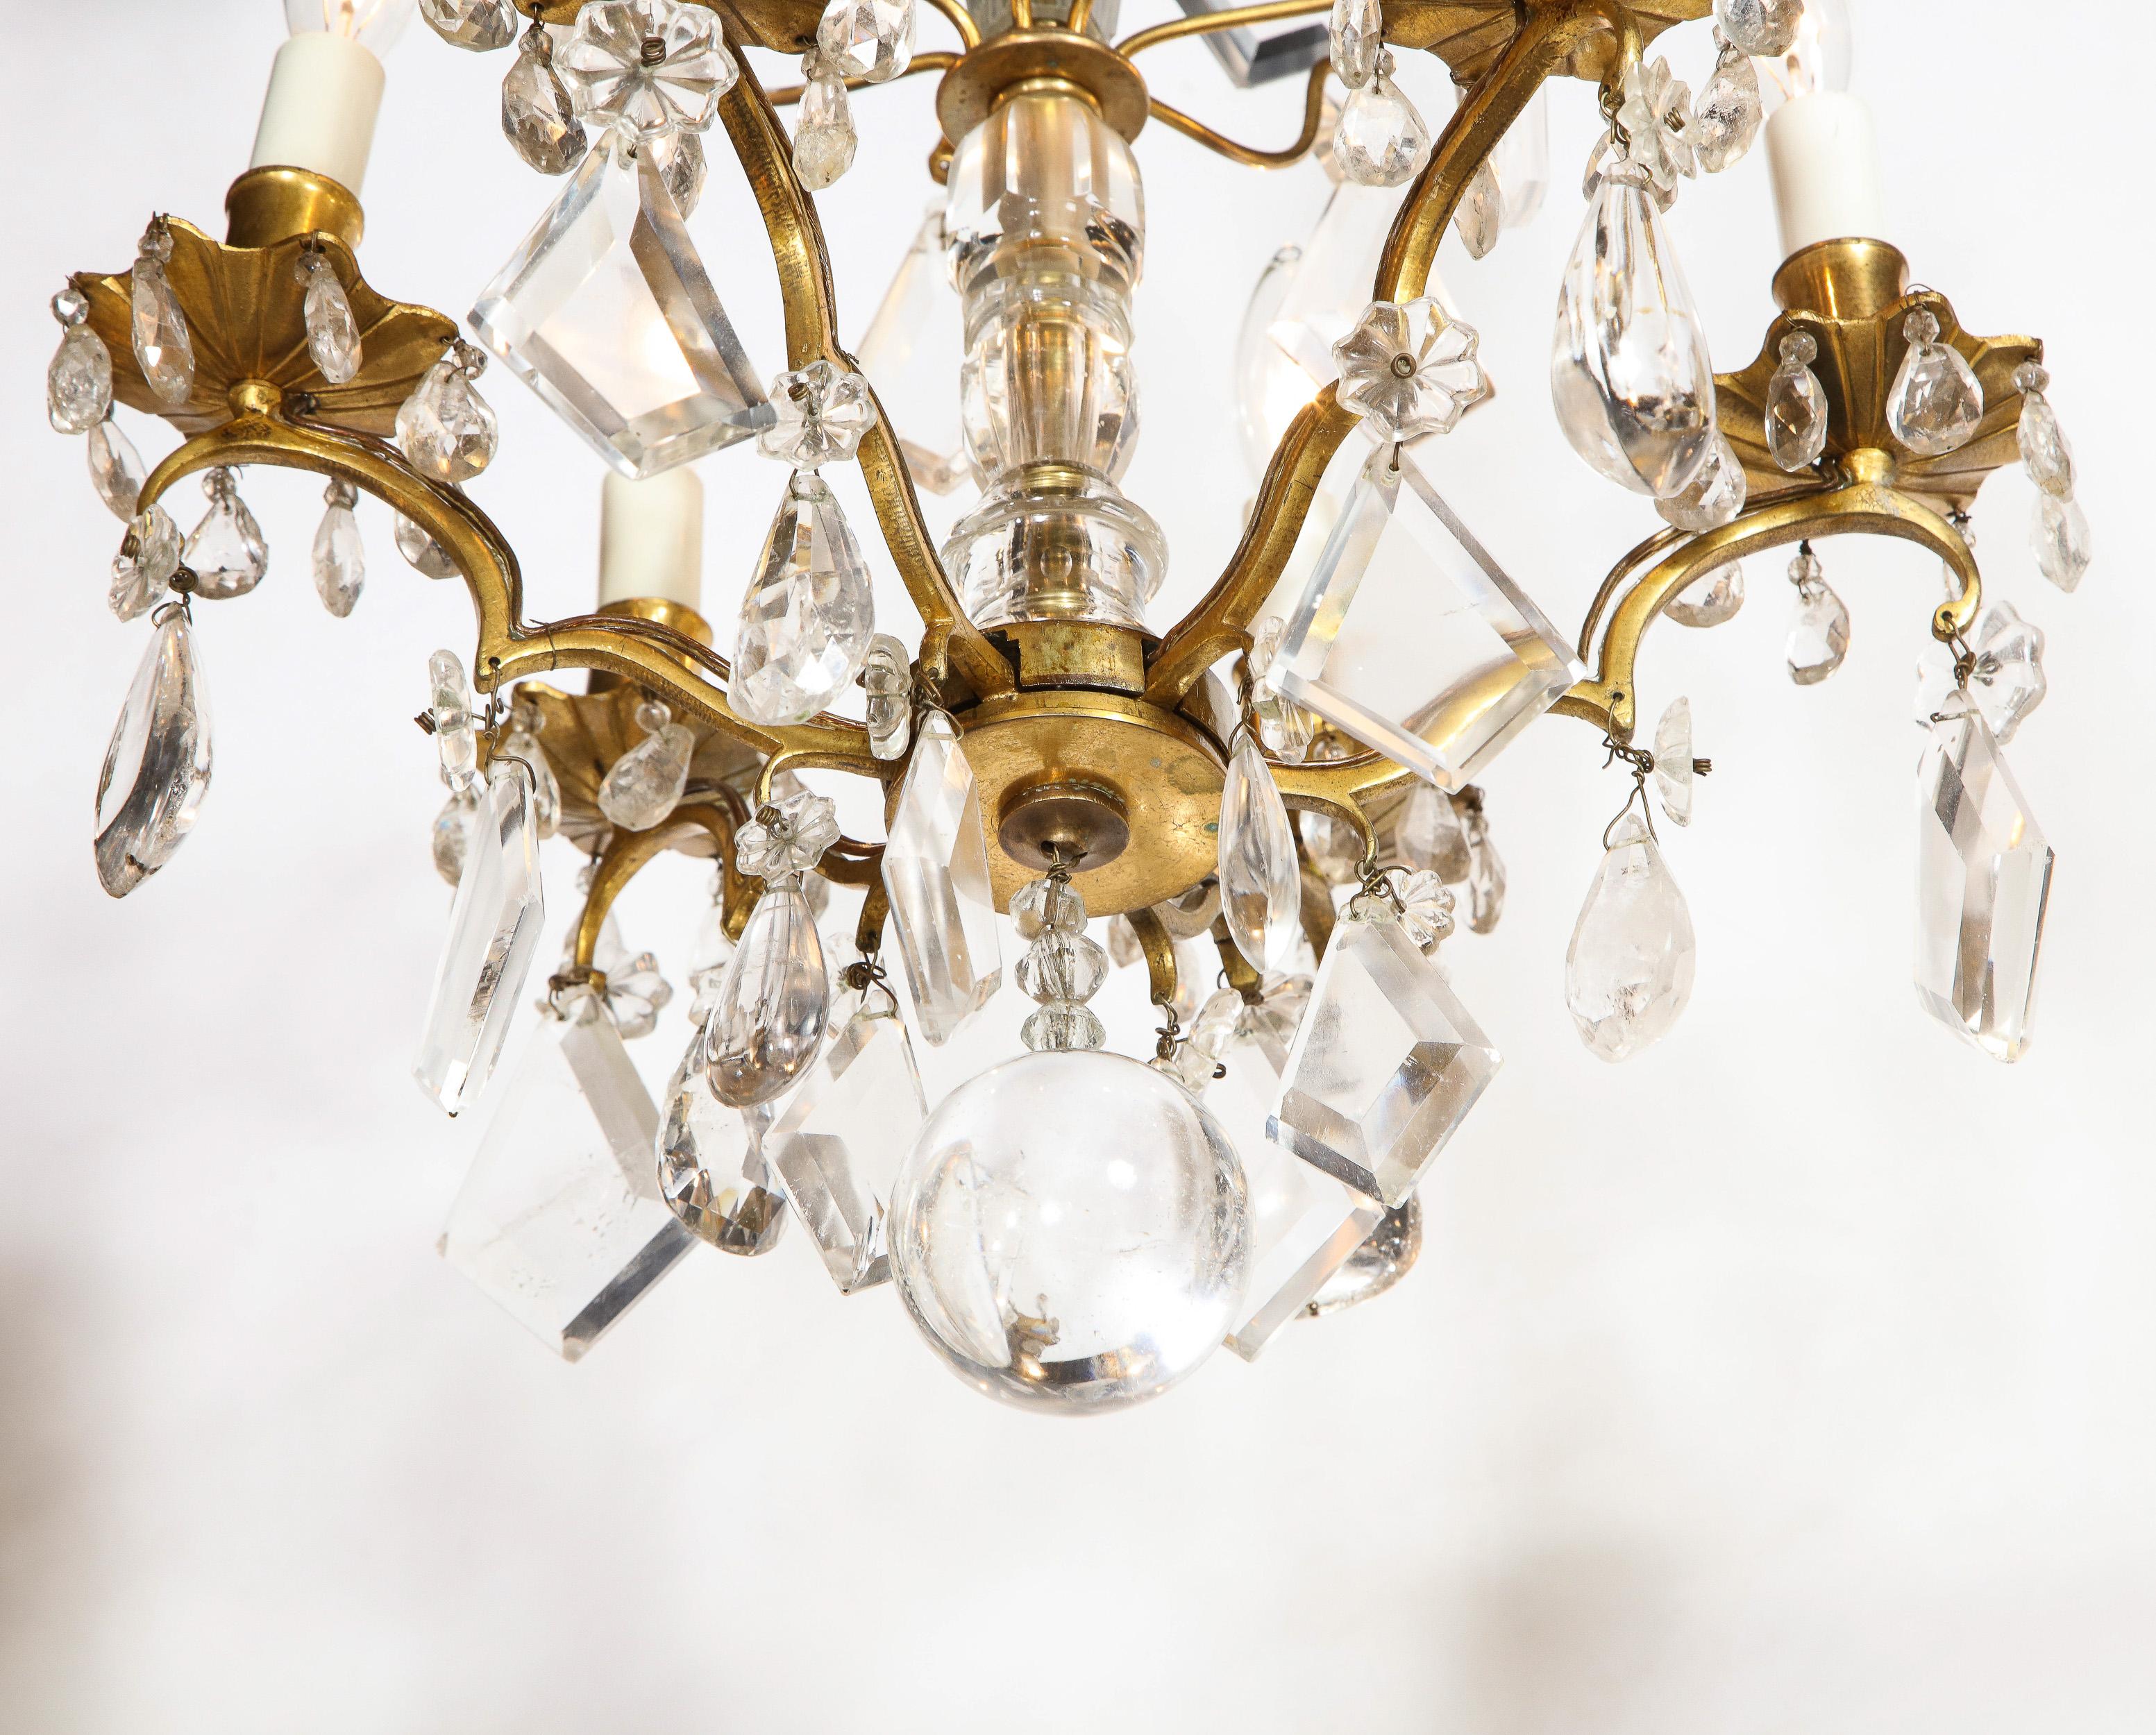 This elegant Louis XV six arm chandelier was realized in France during the early 19th century. It features a gilded bronze body with six sinuously curved undulating arms; a central sculptural stem wrapped in rock crystal; a polished tear drop finial